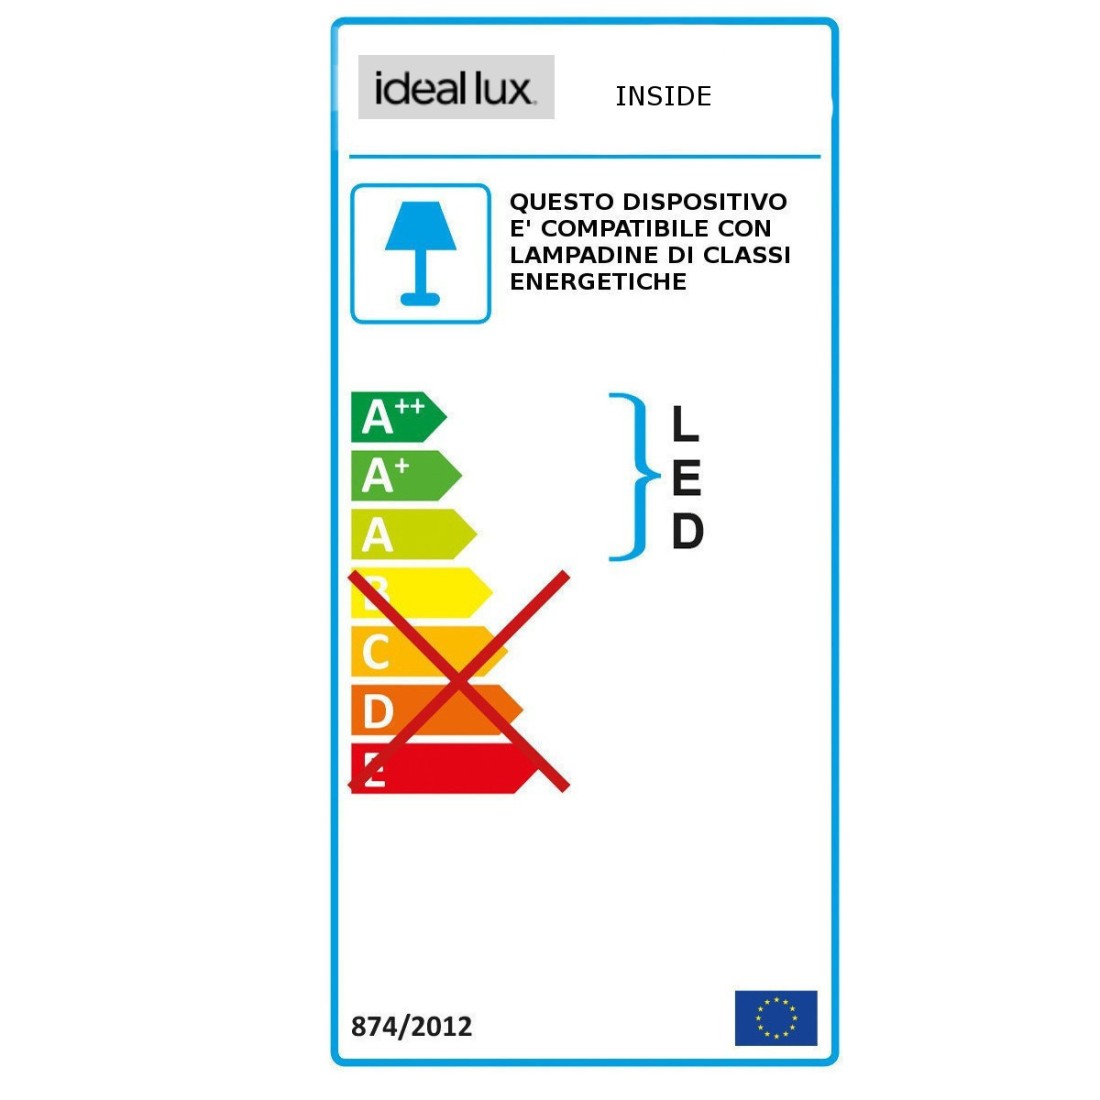 Lampada Picchetto moderno Ideal Lux INSIDE 115412 115429 G9 LED